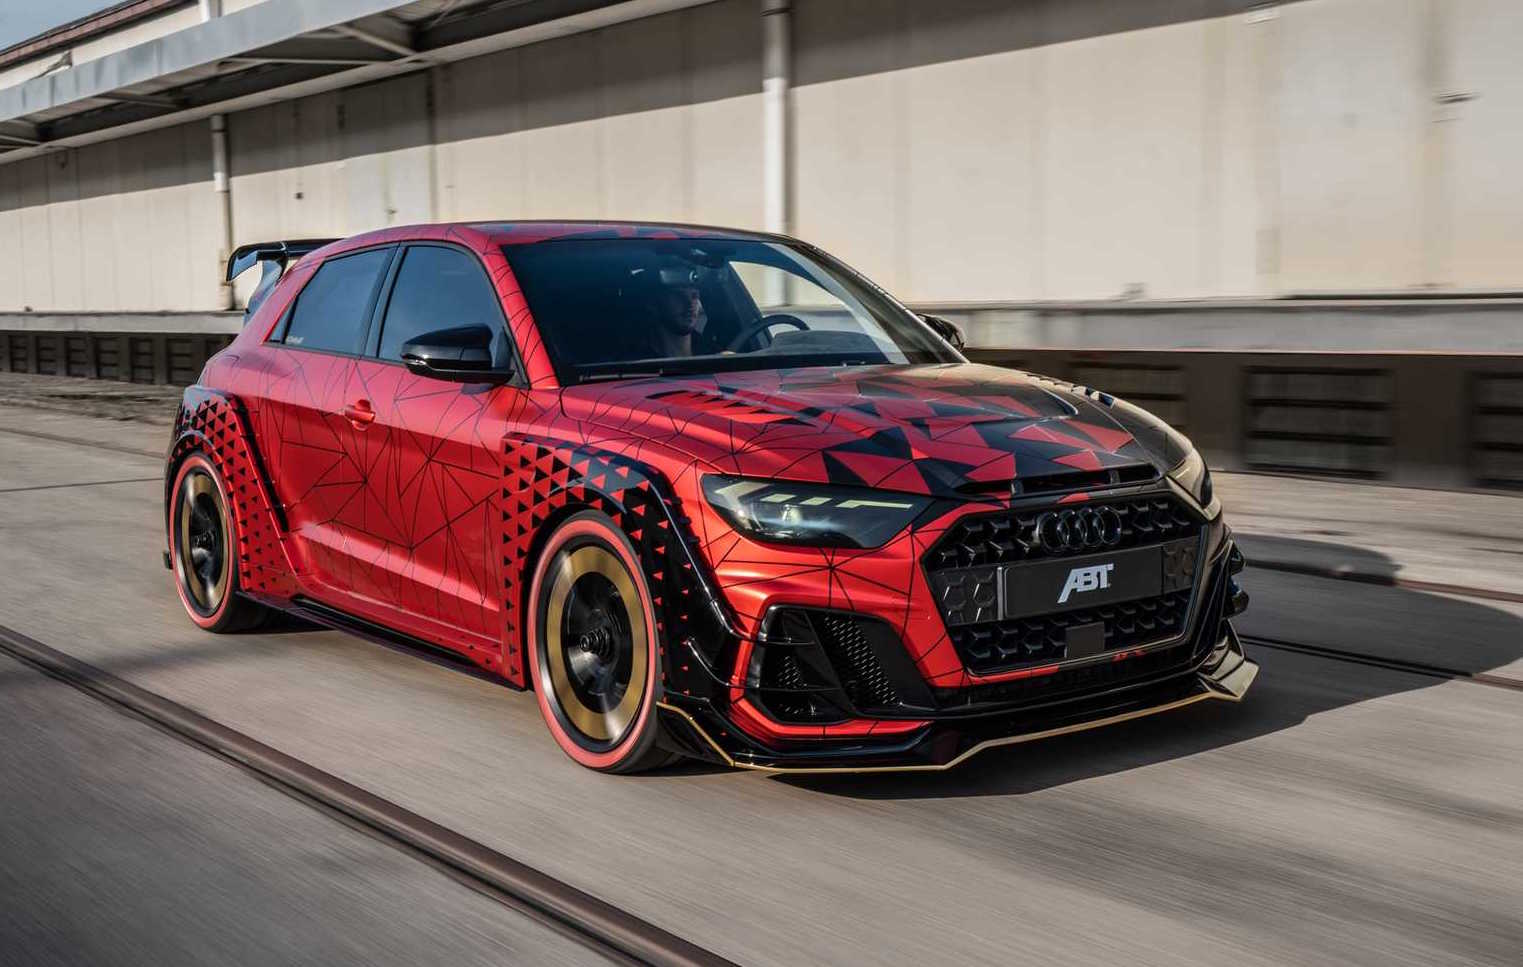 ABT Audi A1 ‘1of1’ showcases insane wide-body tuning potential (video)